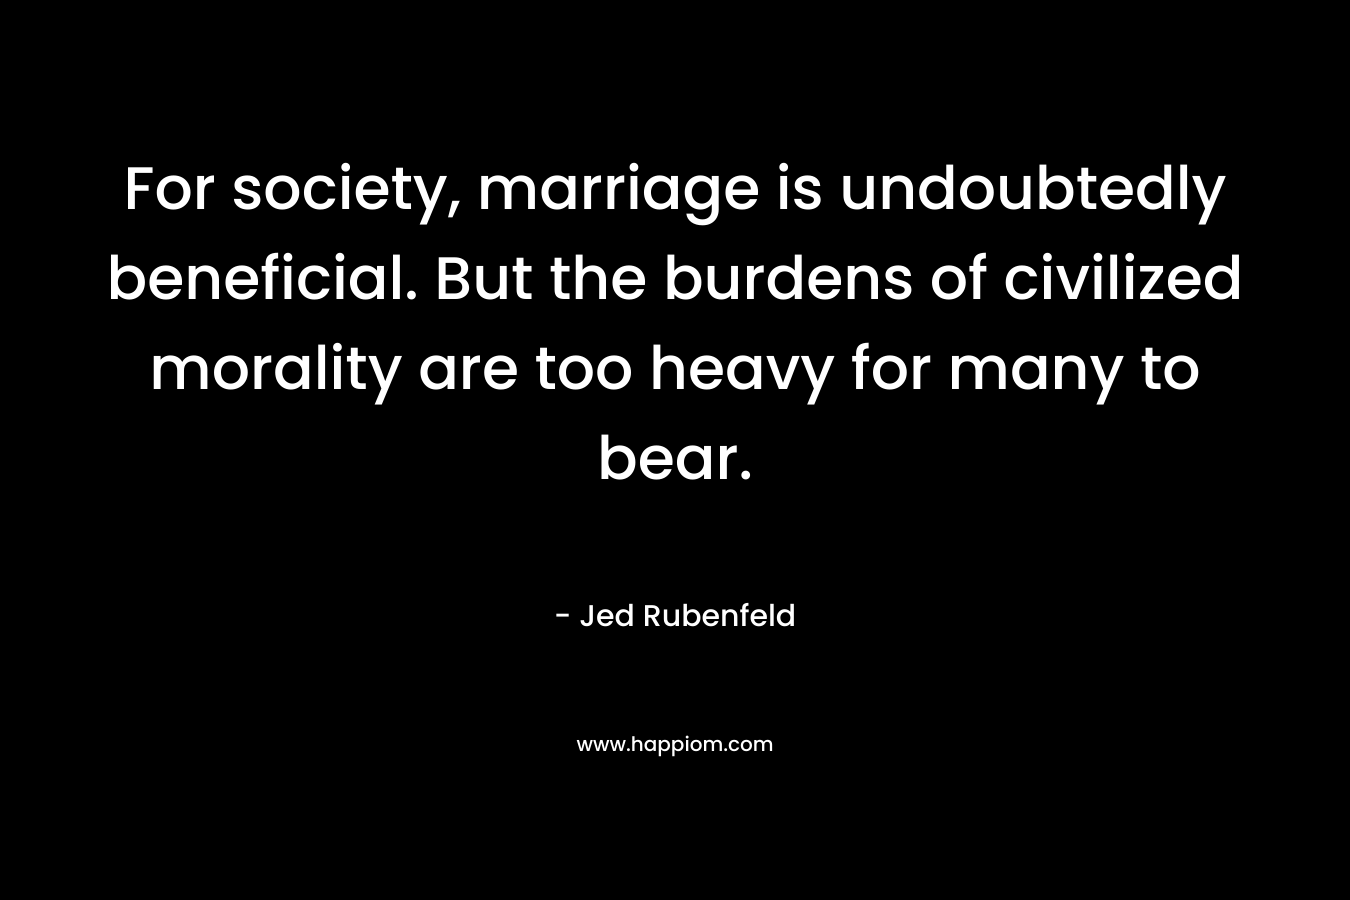 For society, marriage is undoubtedly beneficial. But the burdens of civilized morality are too heavy for many to bear.